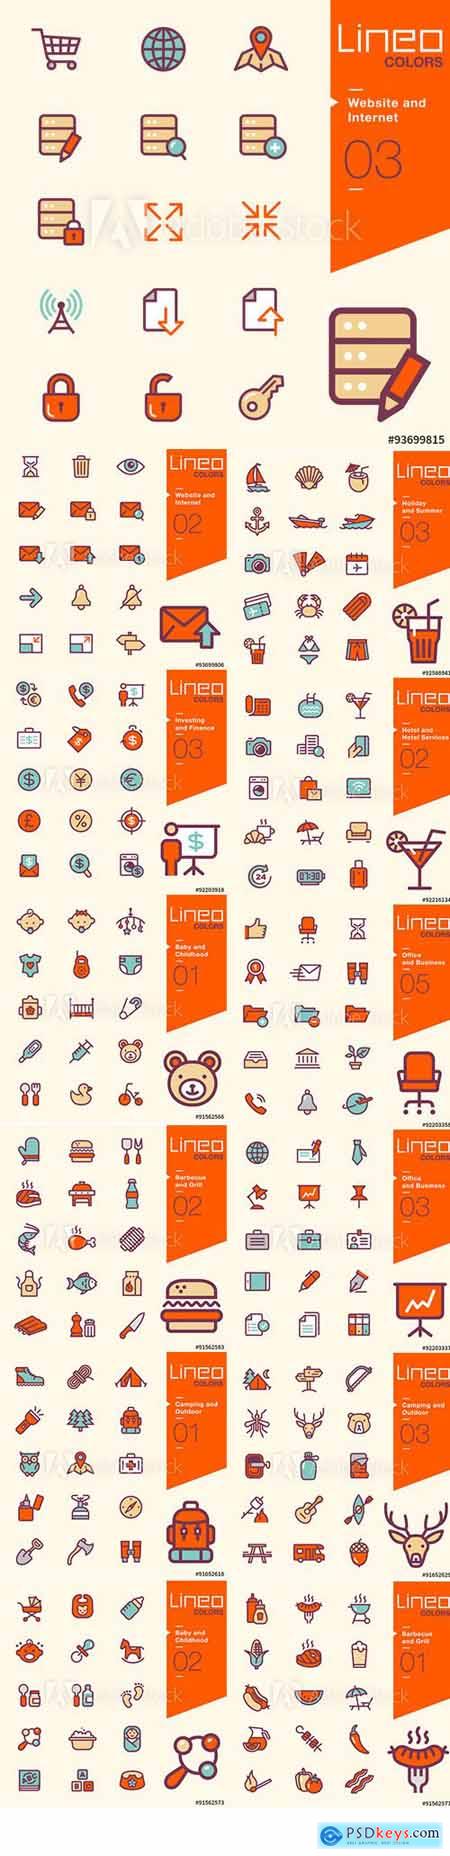 Vector Icons - Lineo Colors Pack Vol 5